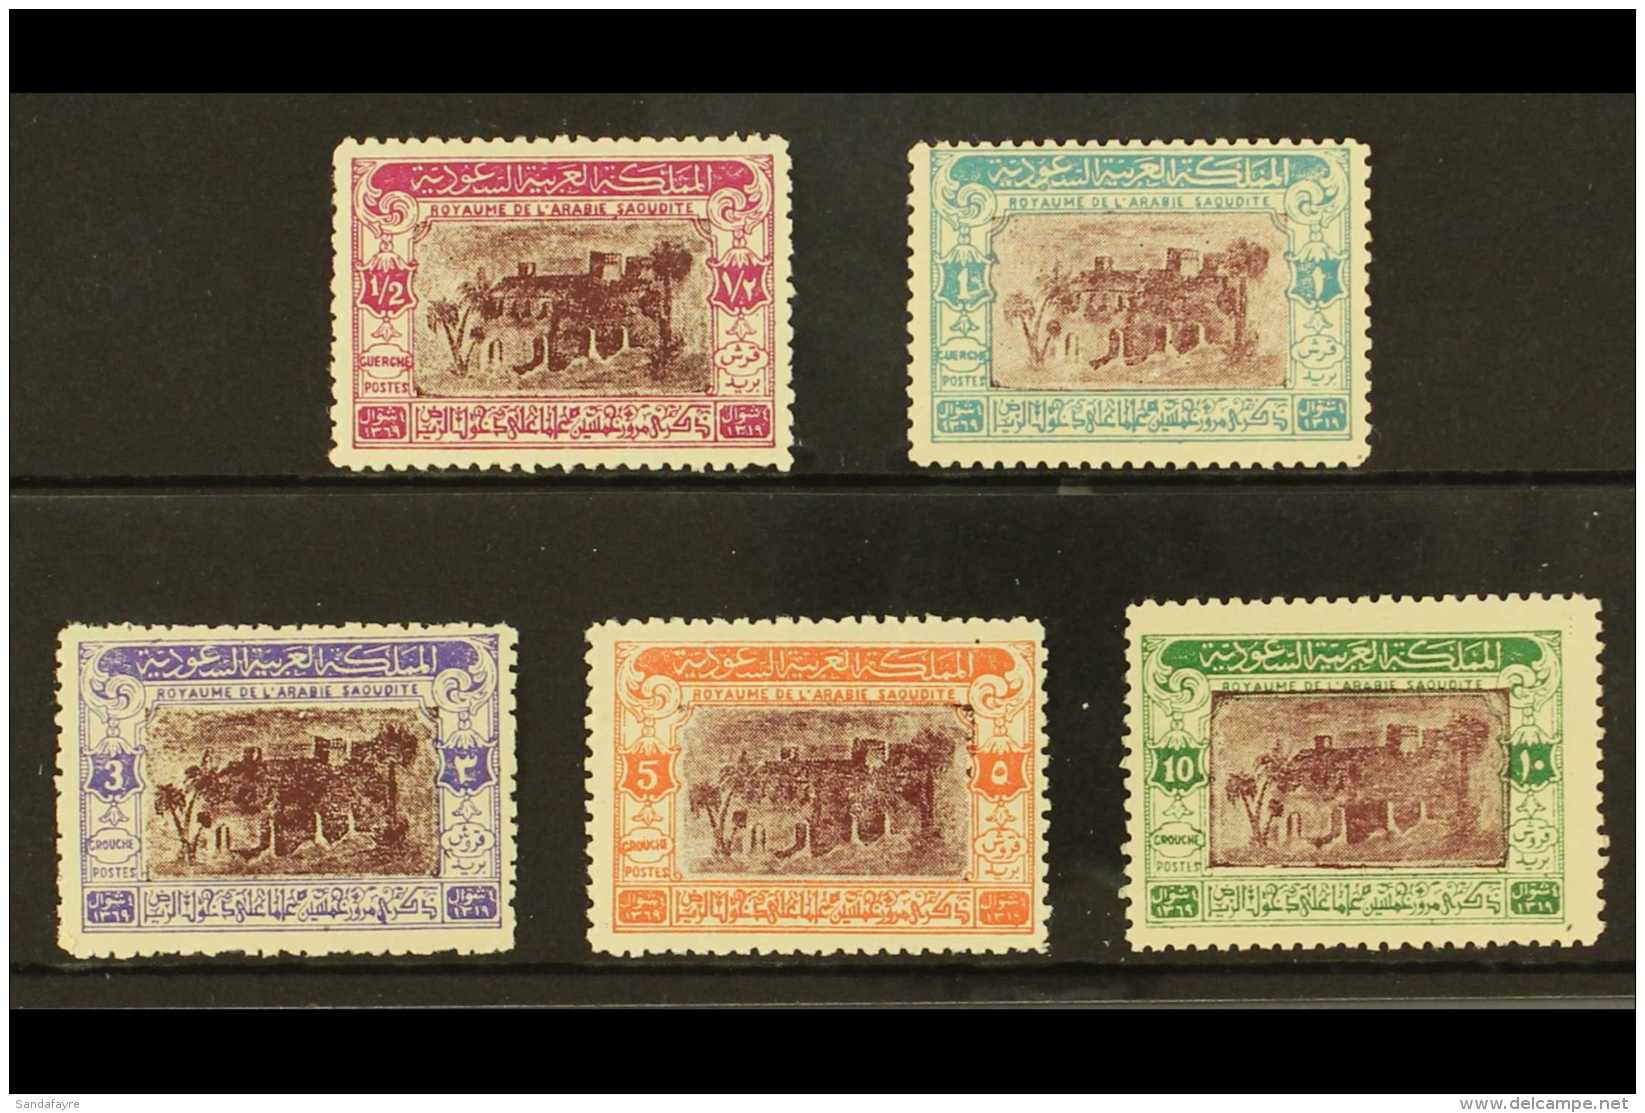 1950  50th Anniv Of Capture Of Riyadh Complete Set, SG 365/369, Never Hinged Mint. (5 Stamps) For More Images,... - Saudi Arabia